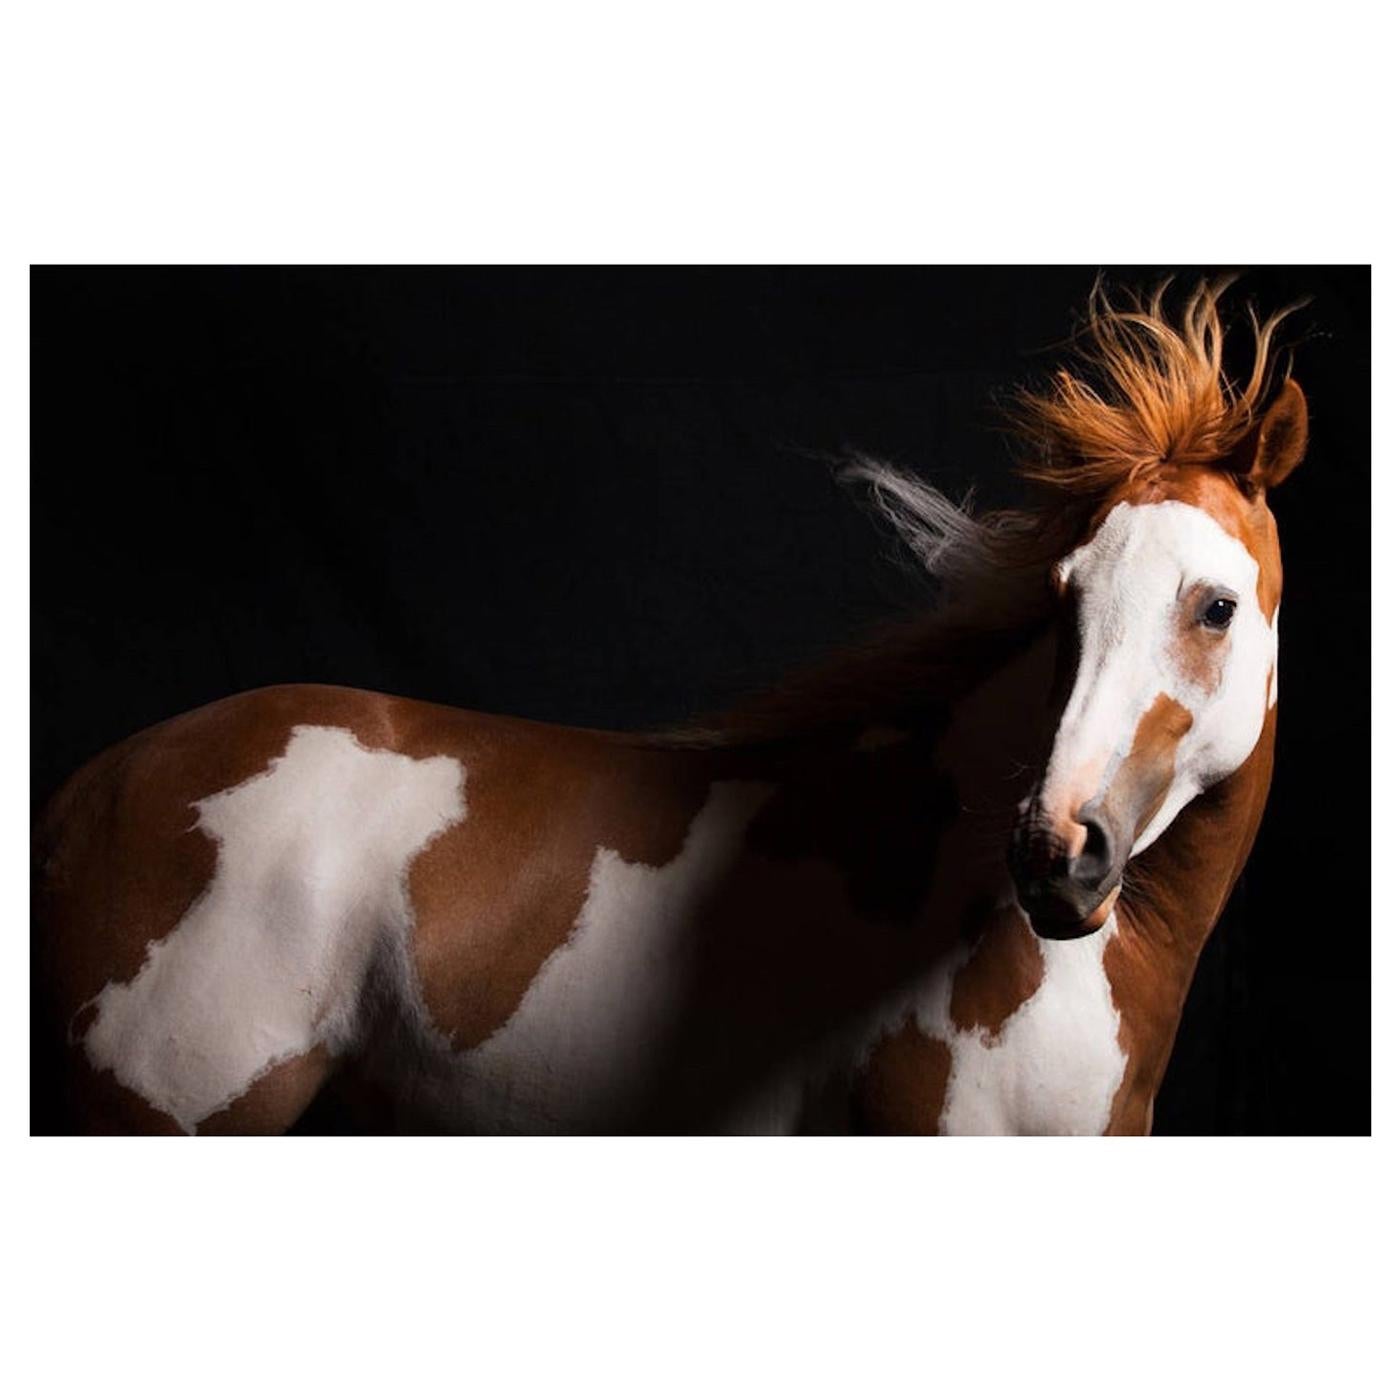 "Lili," Plexiglass Mounted Horse Color Photograph by Lisa Houlgrave